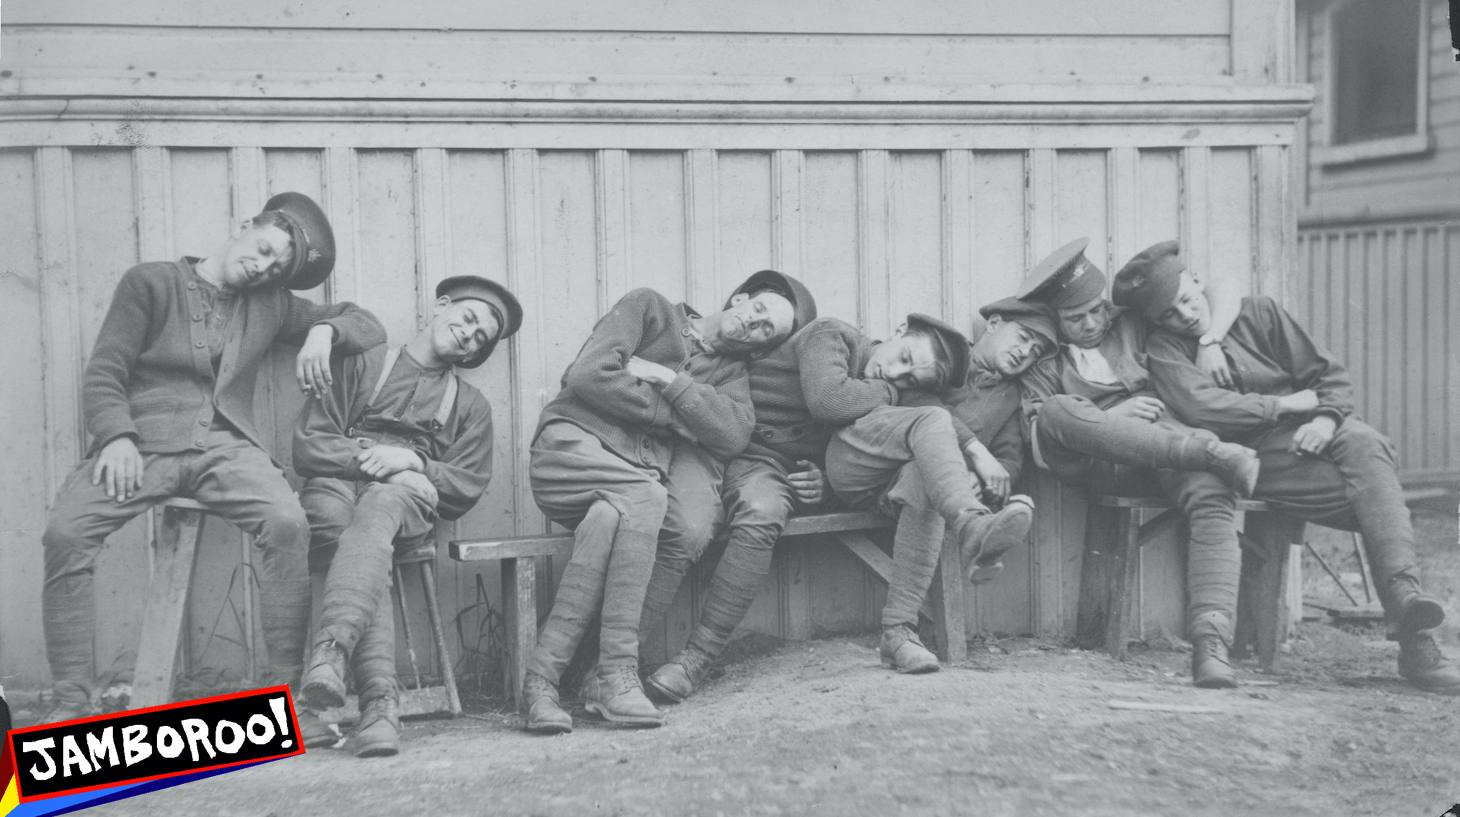 Soldiers of the Canadian Mounted Rifles Regiment taking a nap following military maneuvers during World War One, circa 1914-1918. (Press Illustrating Service/FPG/Archive Photos/Getty Images)